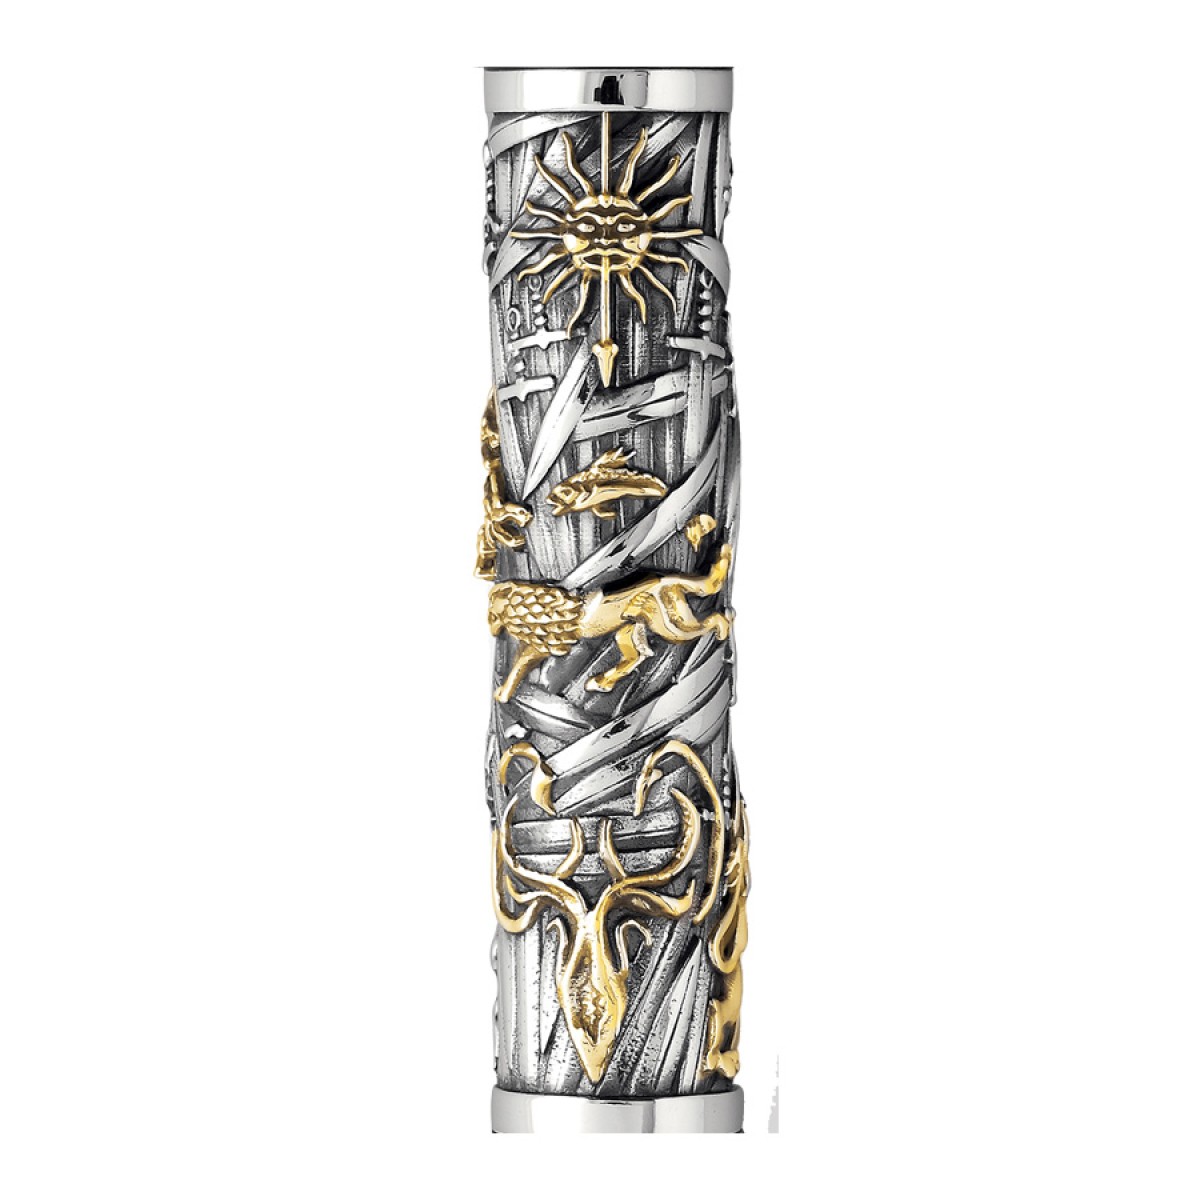 Montegrappa - The Game Of Thrones Limited Edition - Rollerball Pen Silver